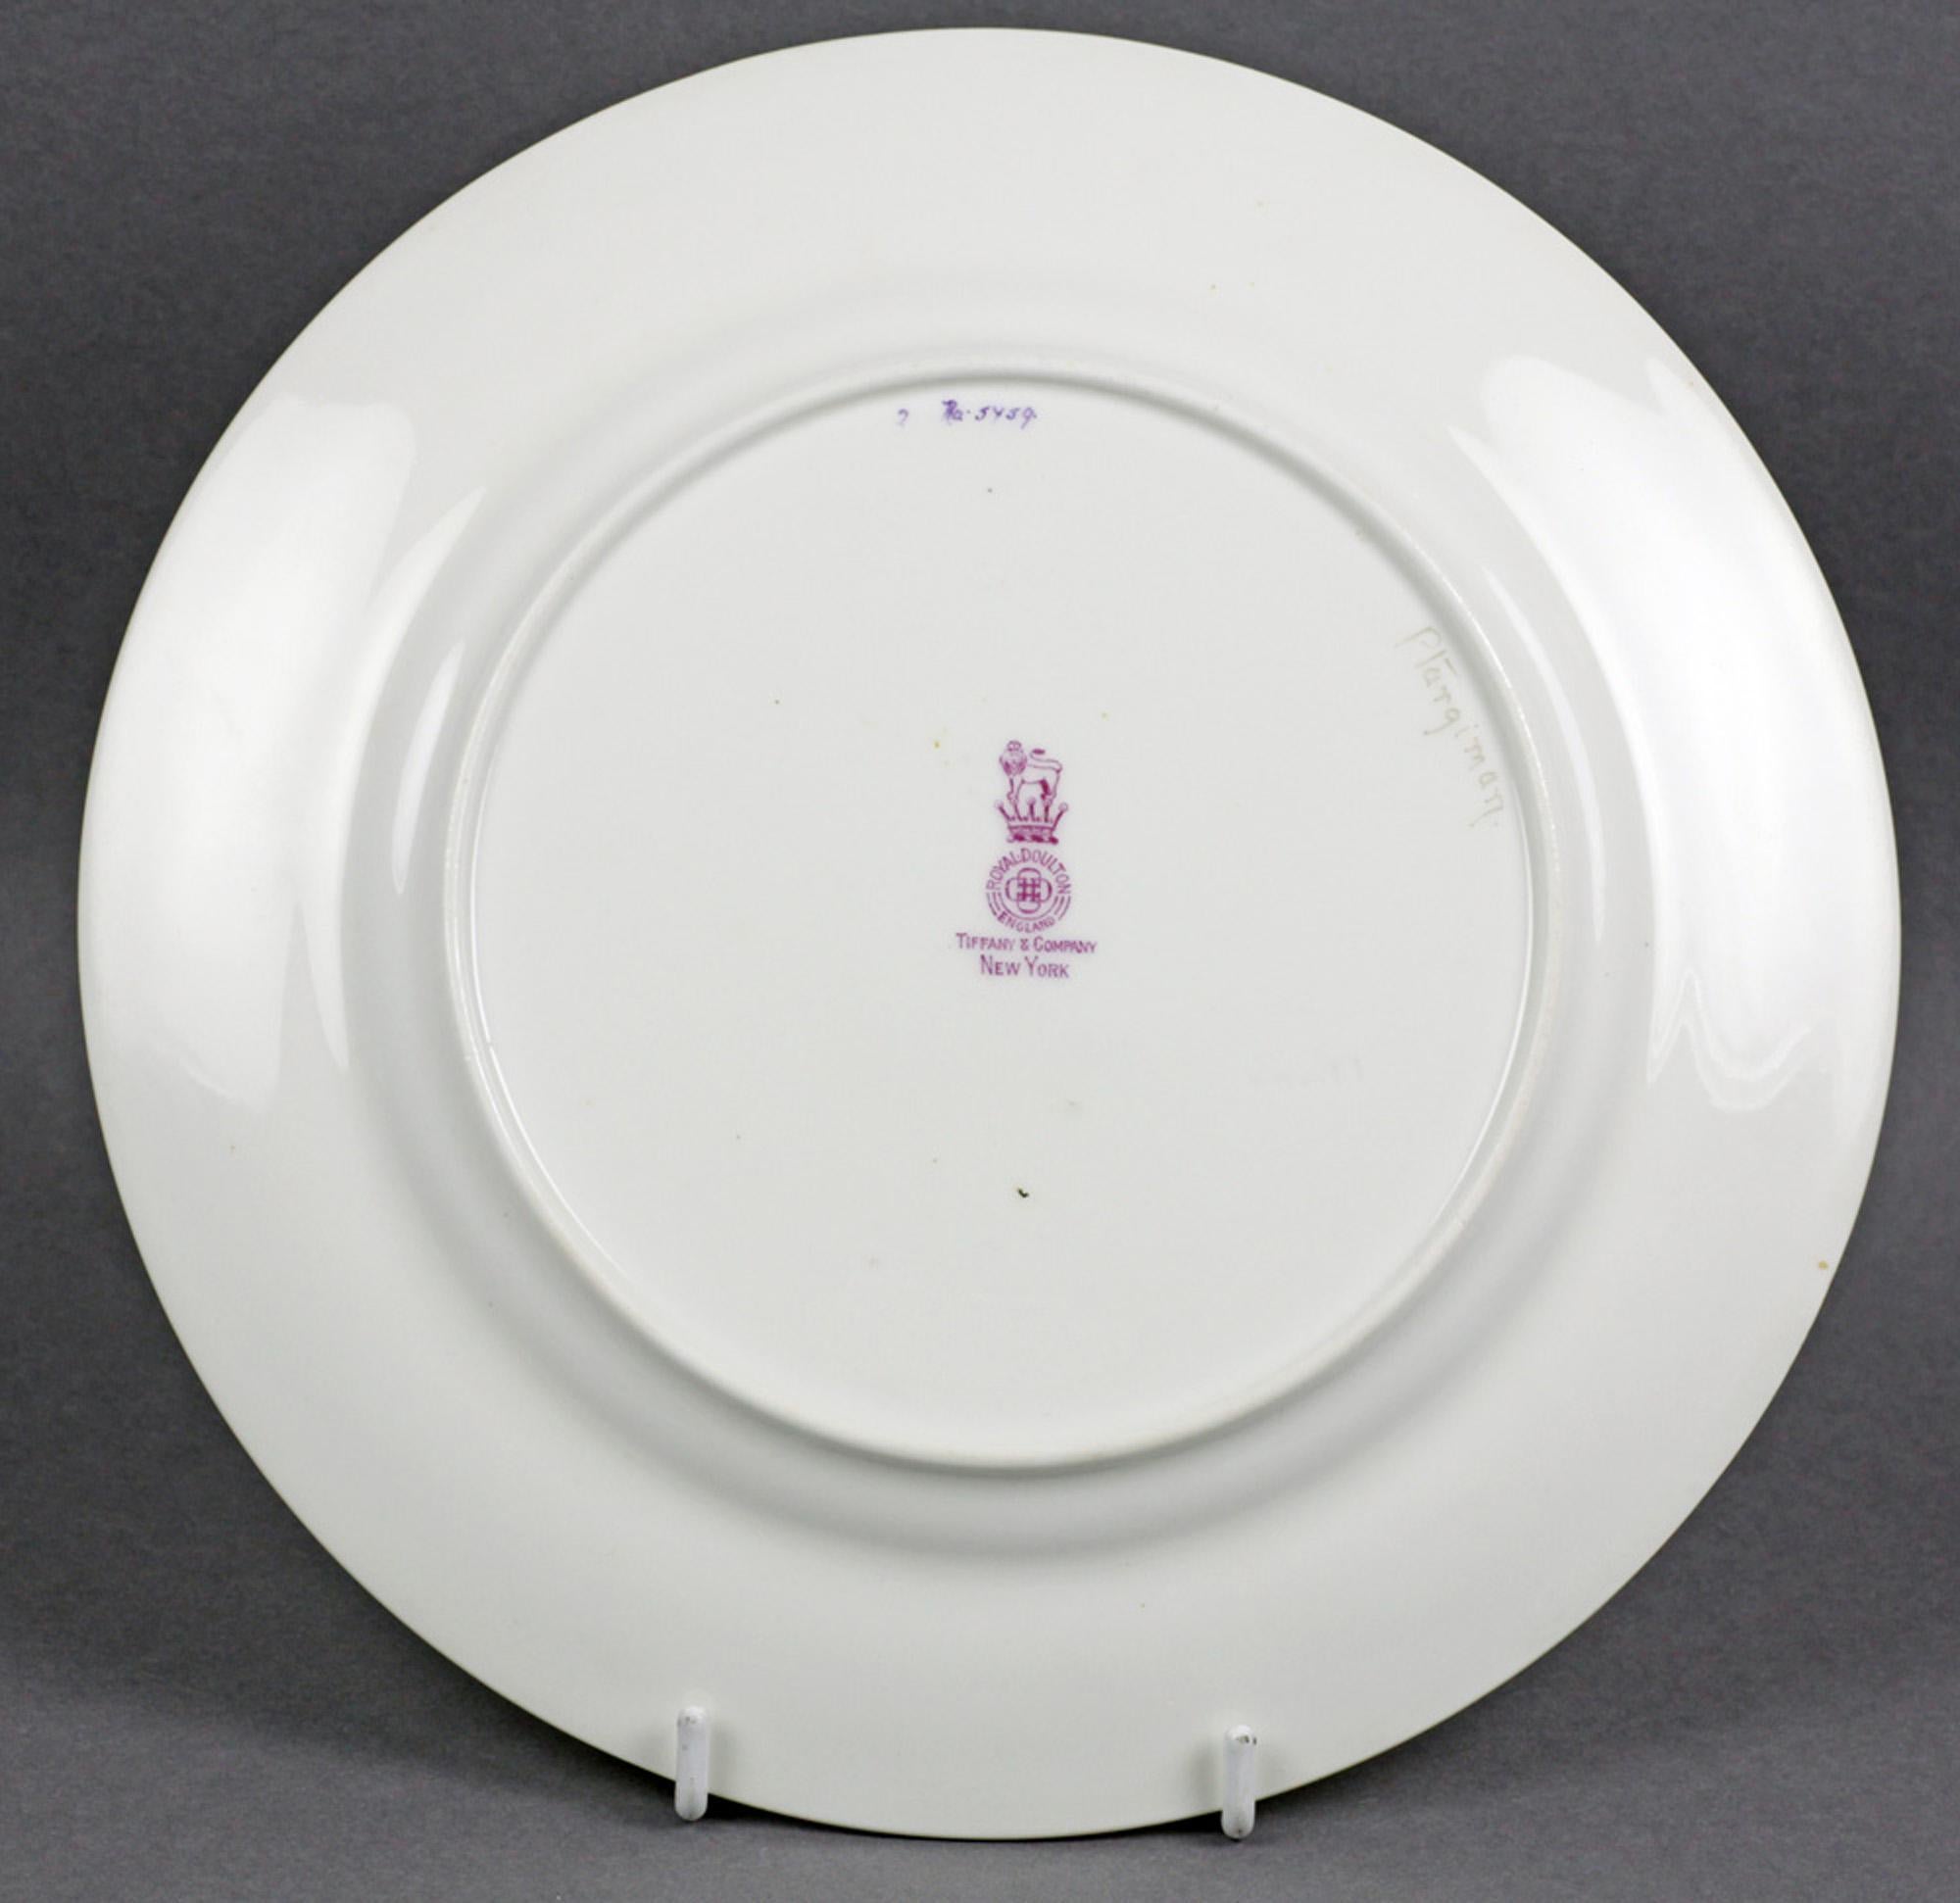 Tiffany & Co NY Joseph Hancock Royal Doulton Ptarmigan Painted Porcelain Plate In Good Condition For Sale In Bishop's Stortford, Hertfordshire